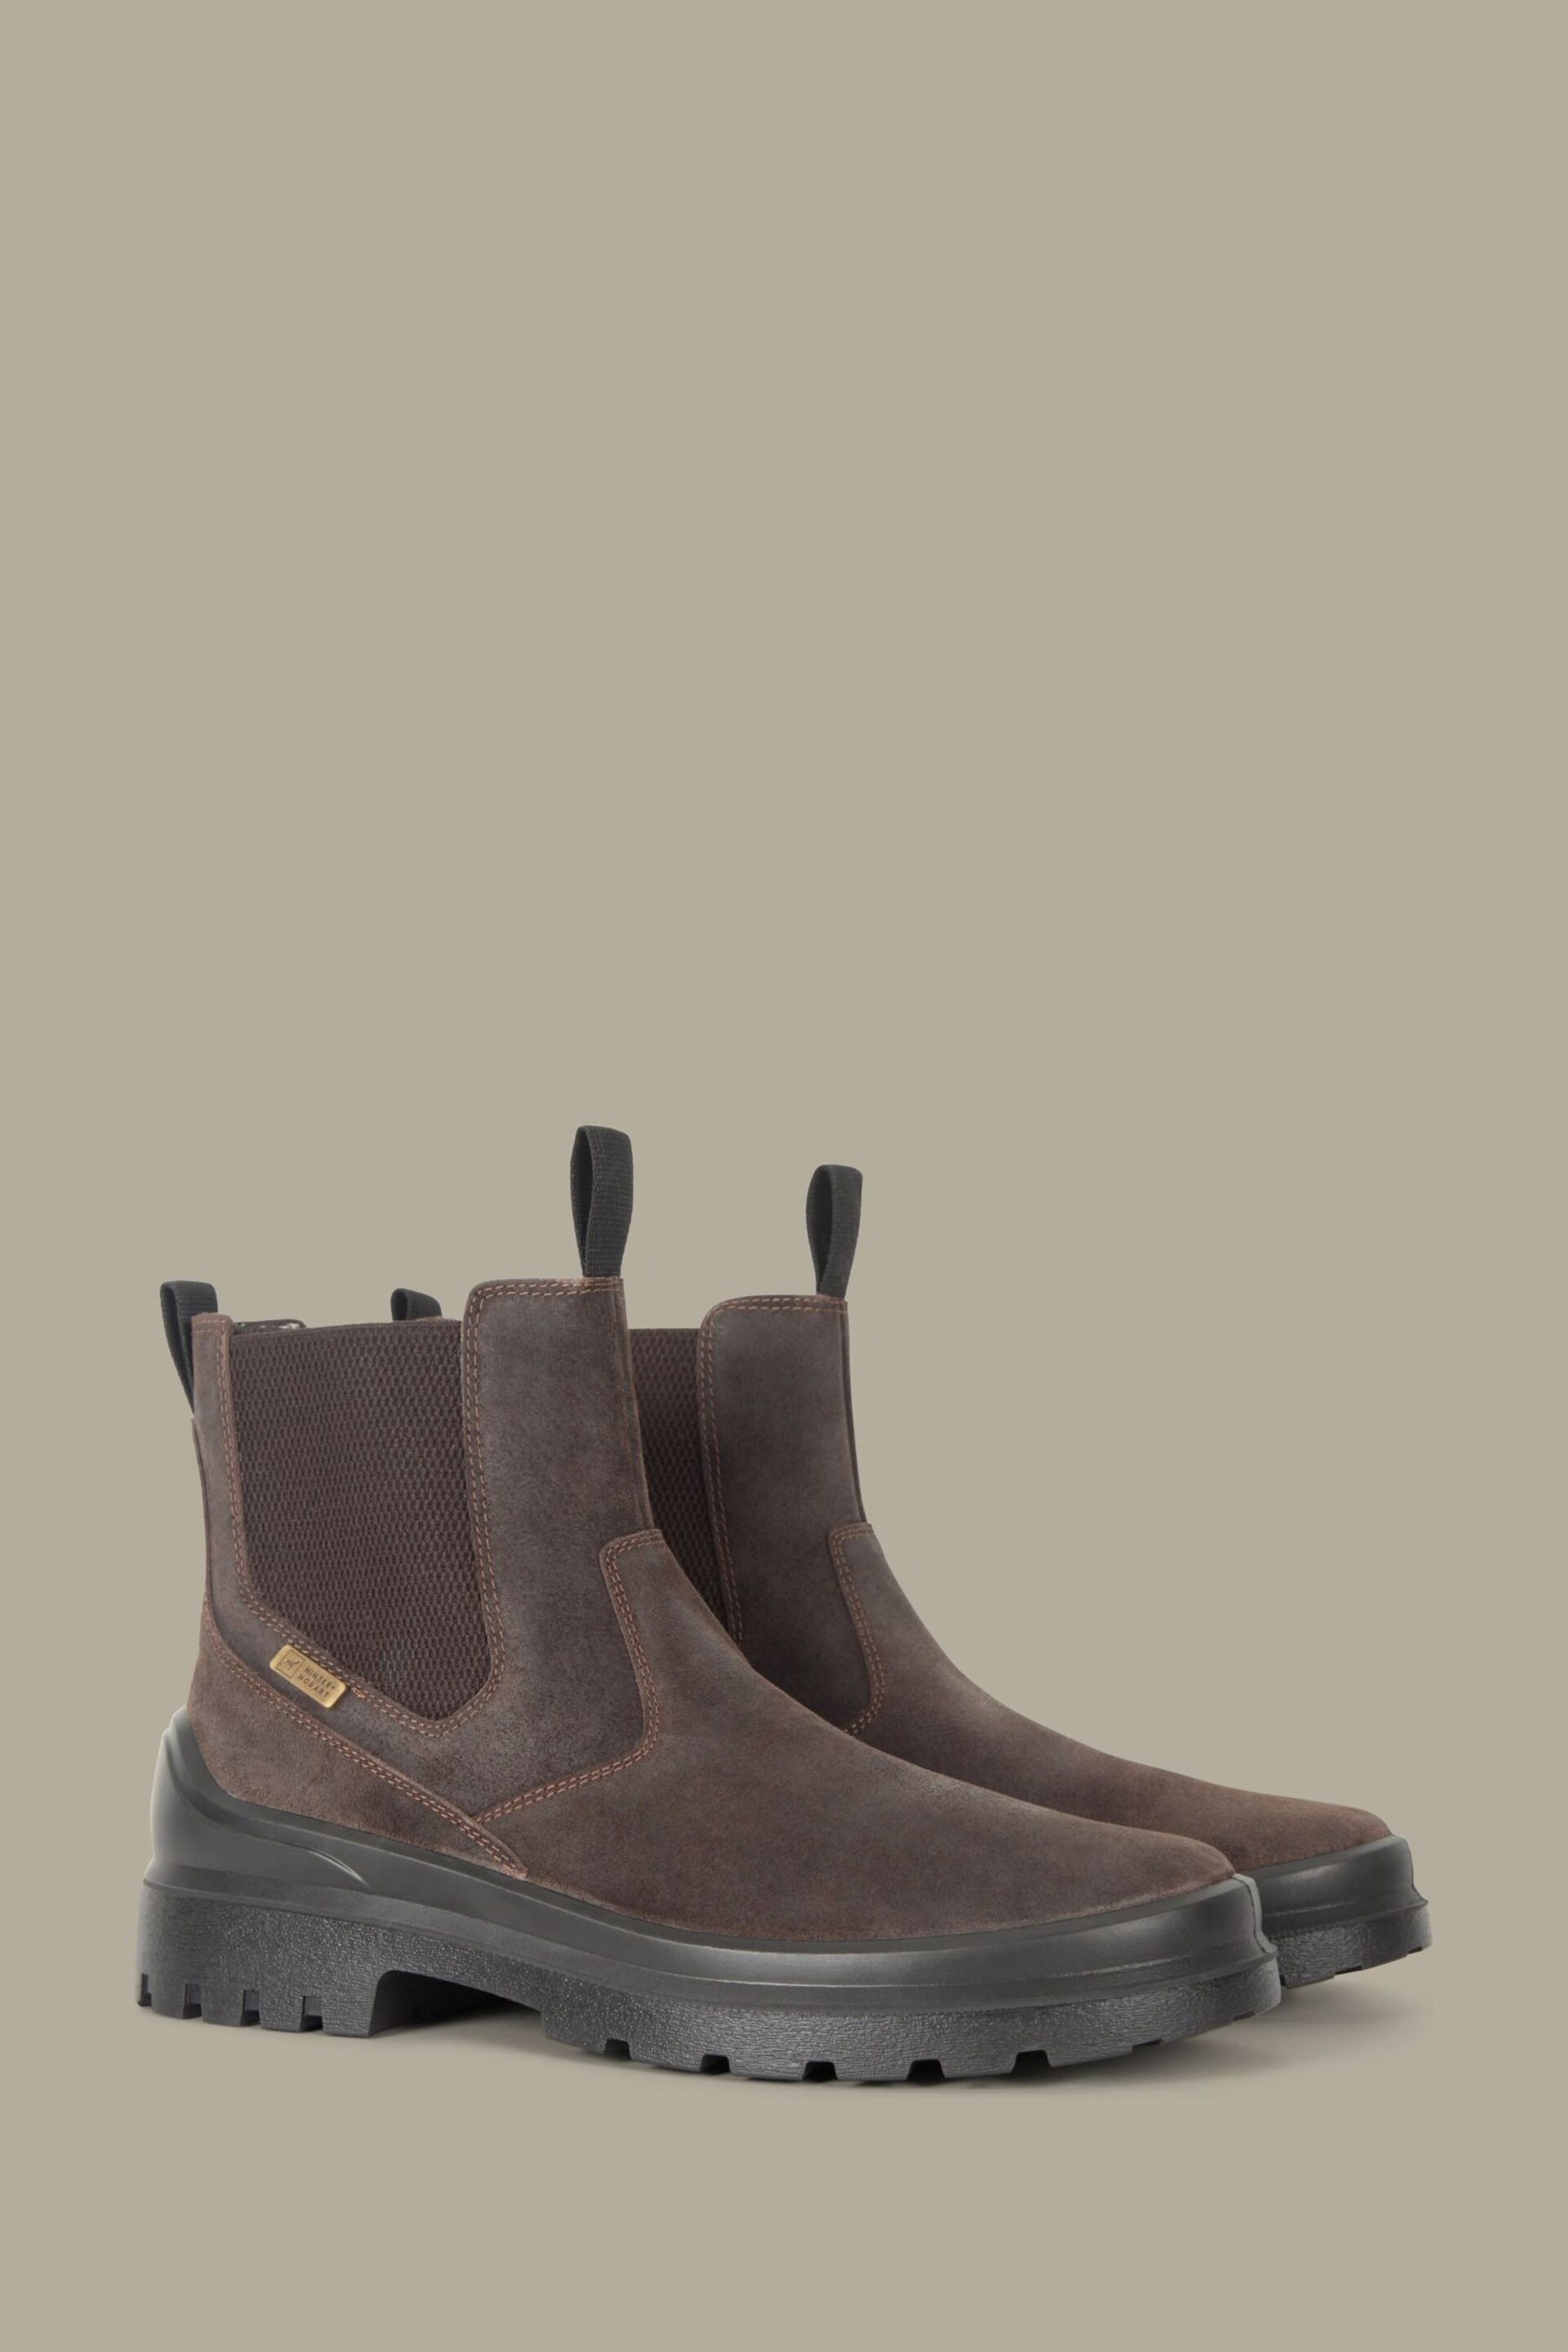 Mountain Warehouse Brown Salcombe Mens Waterproof Leather Chelsea Boots - Image 1 of 5